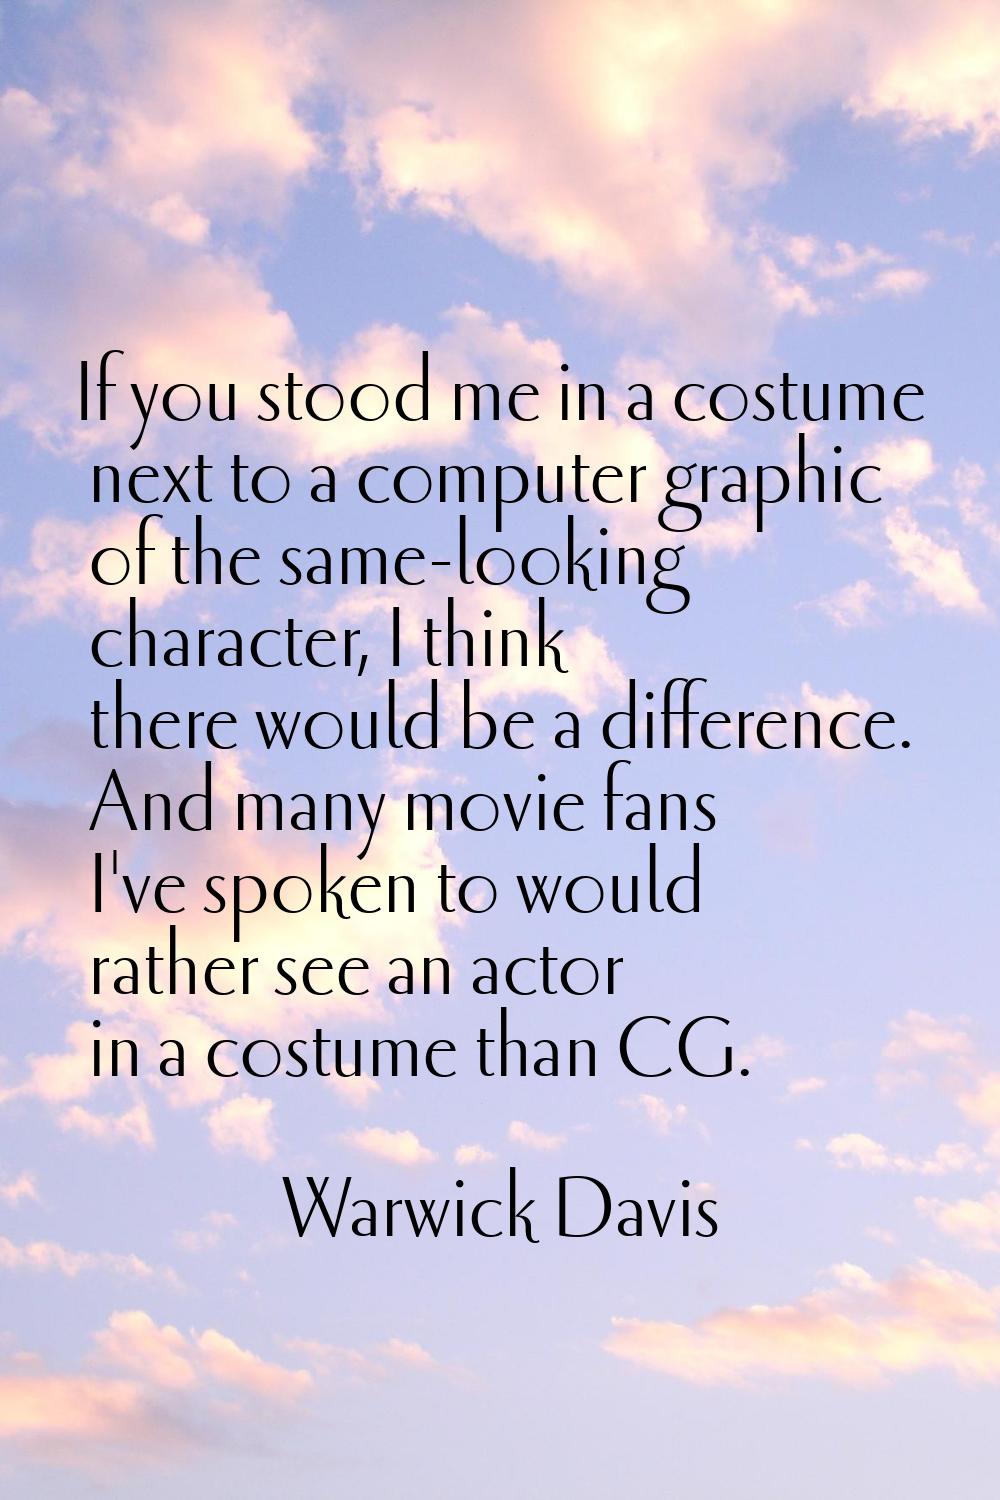 If you stood me in a costume next to a computer graphic of the same-looking character, I think ther